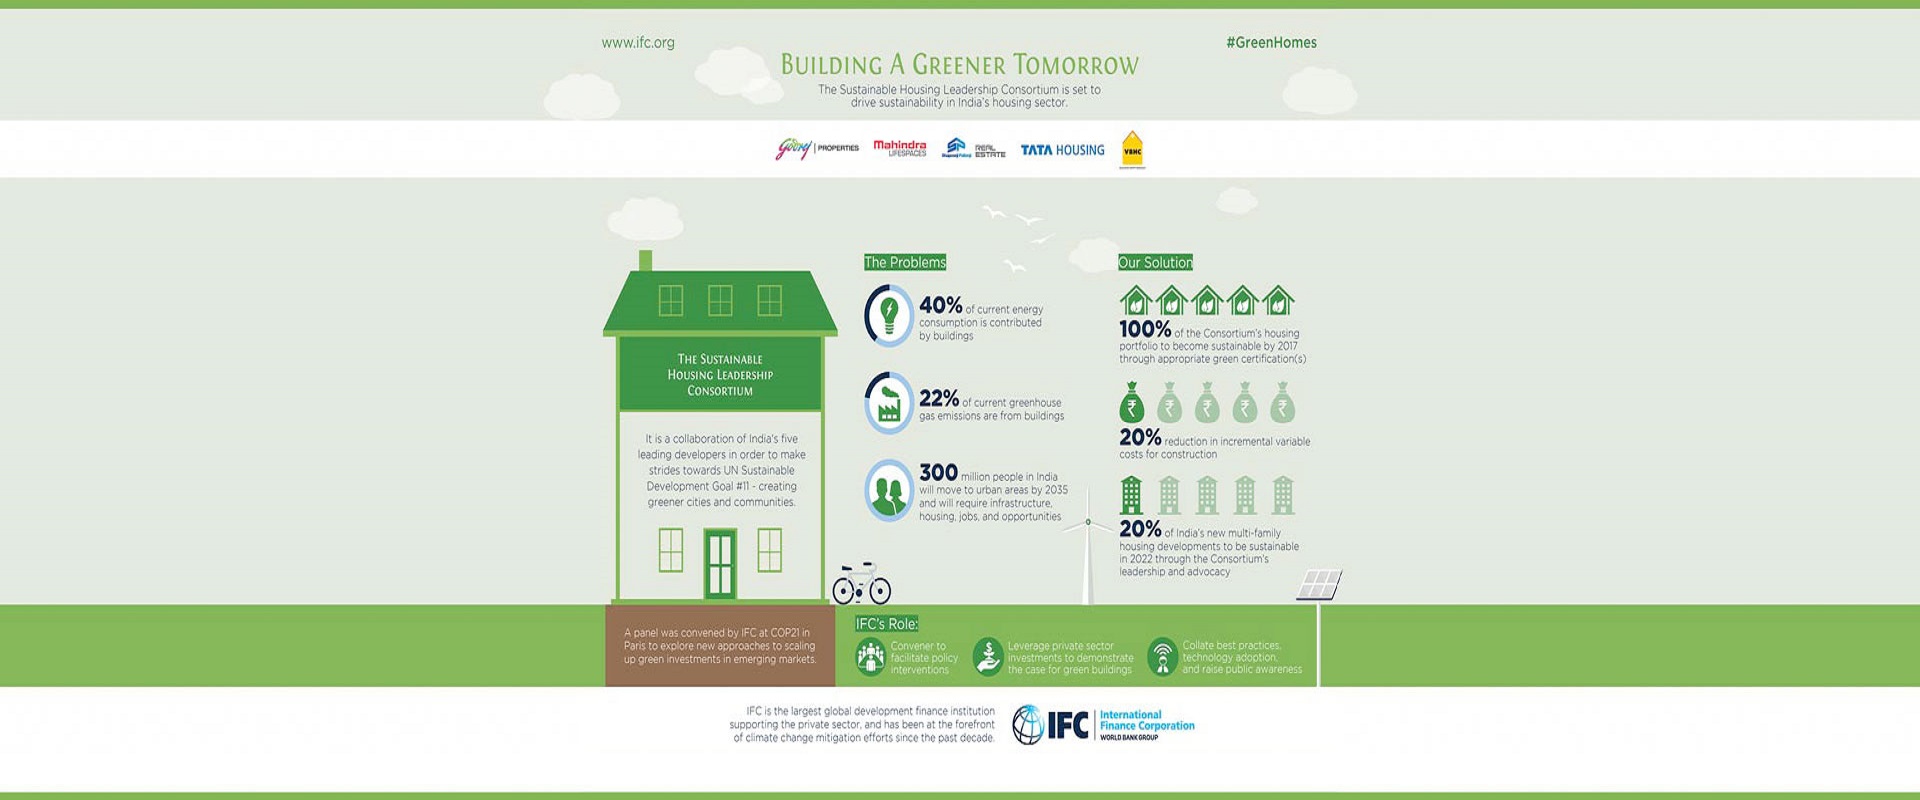 Godrej Properties is one of the five founding members of the IFC led sustainable housing leadership consortium with a mandate to drive sustainability in the Indian housing sector.